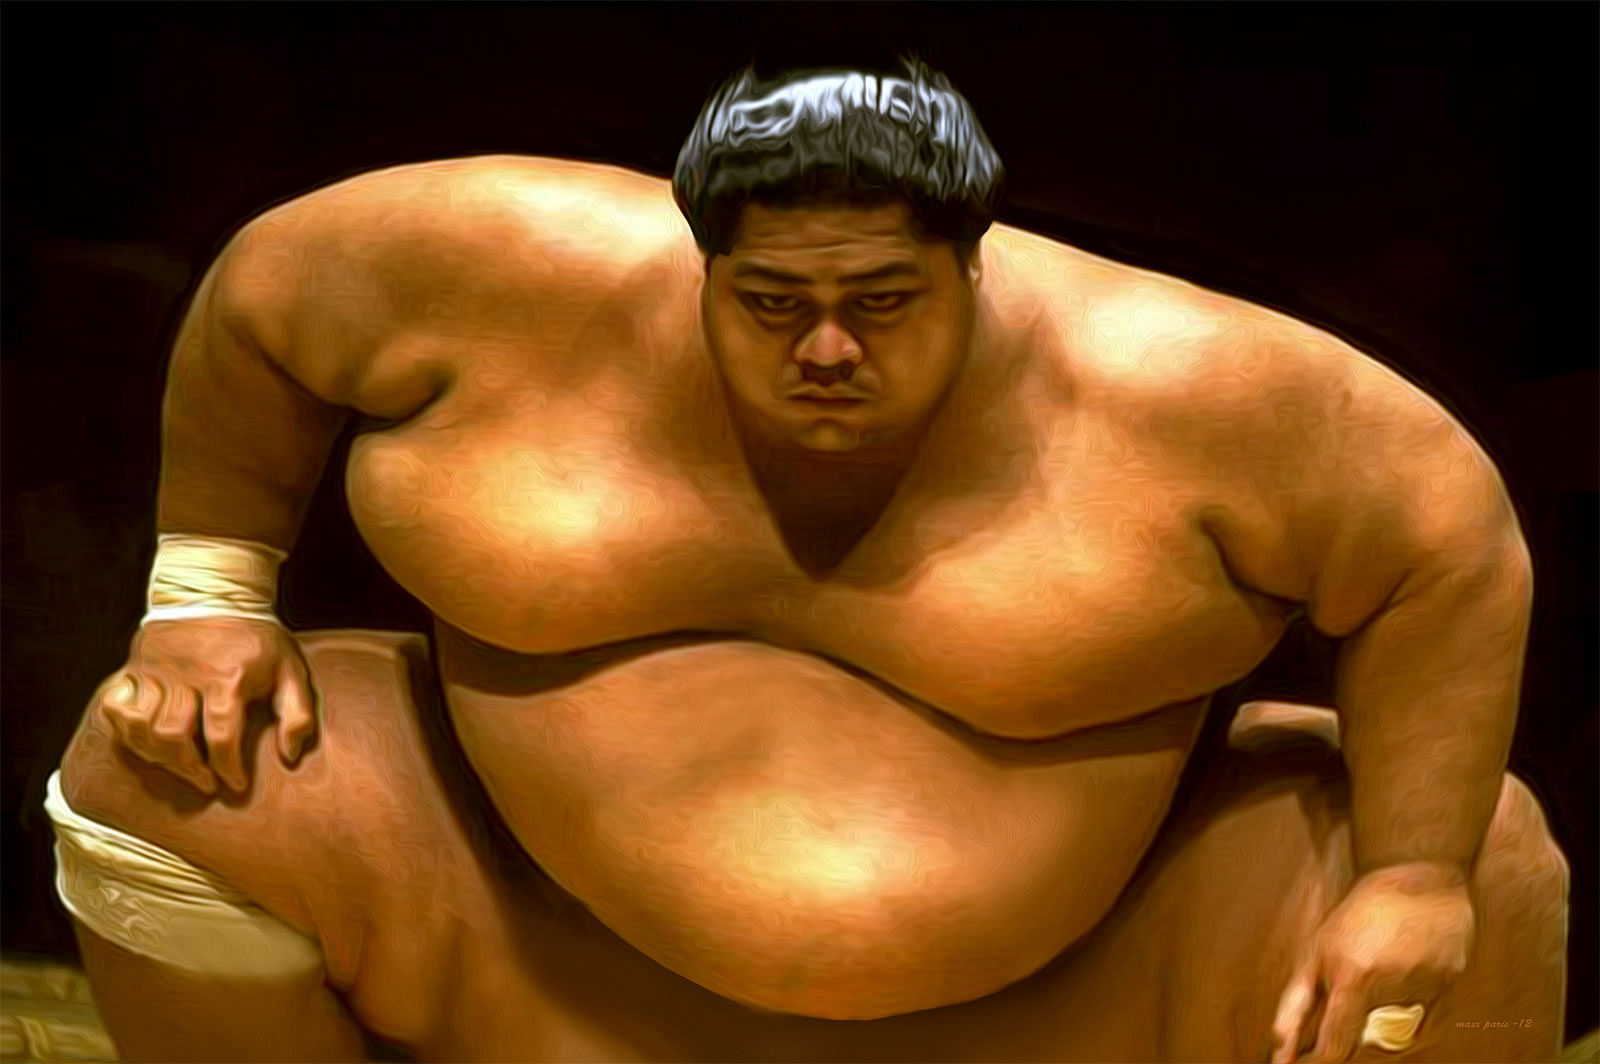 know interesting fact about Sumo